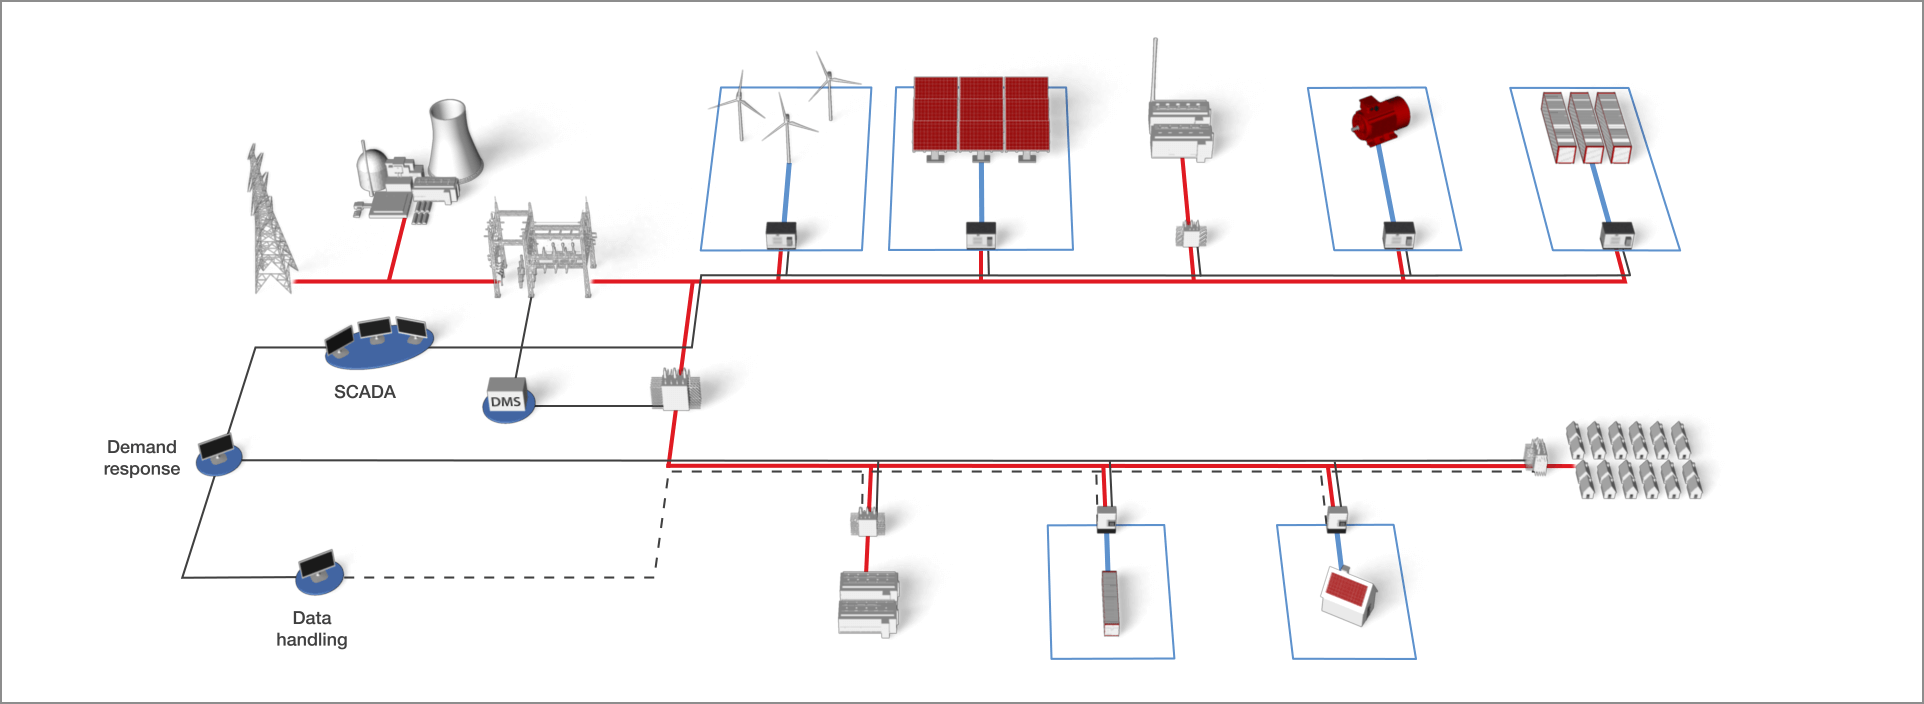 Microgrid testing overview rectangulary